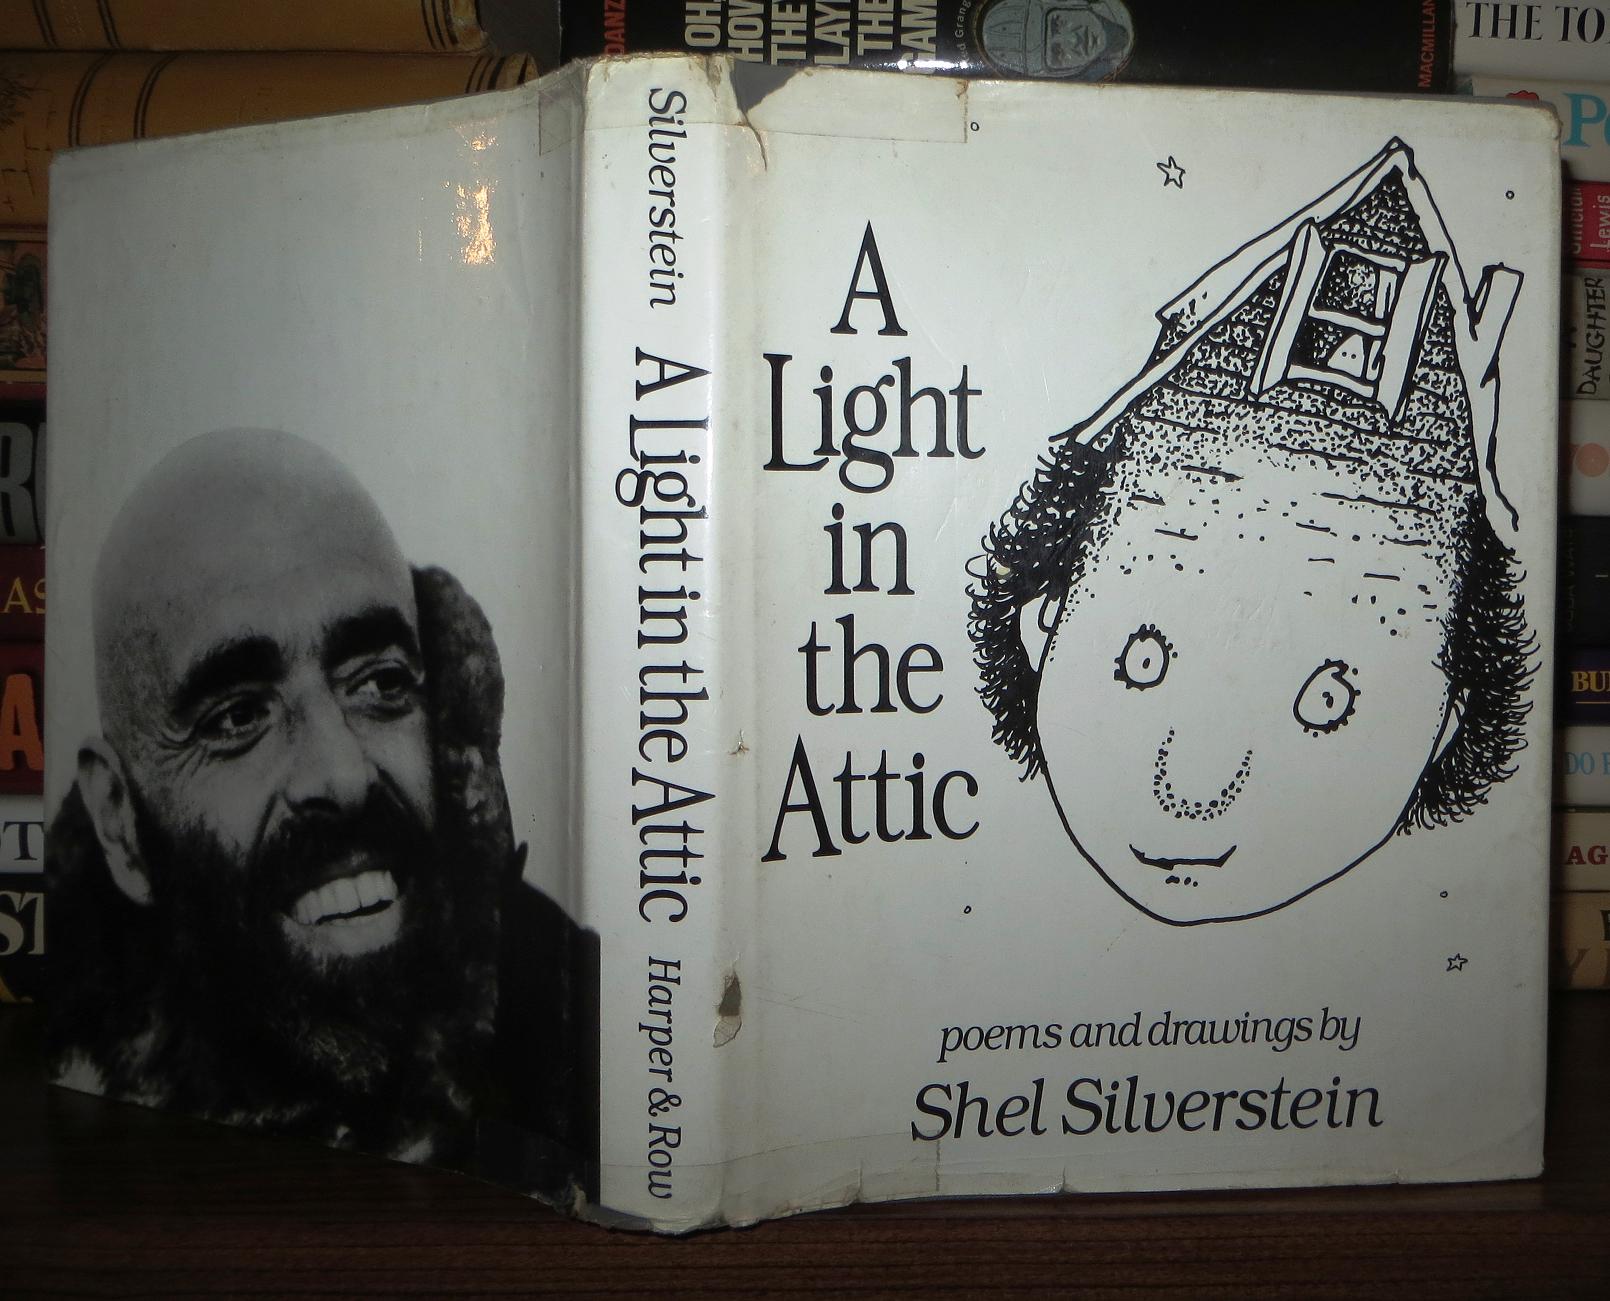 a light in the attic spine